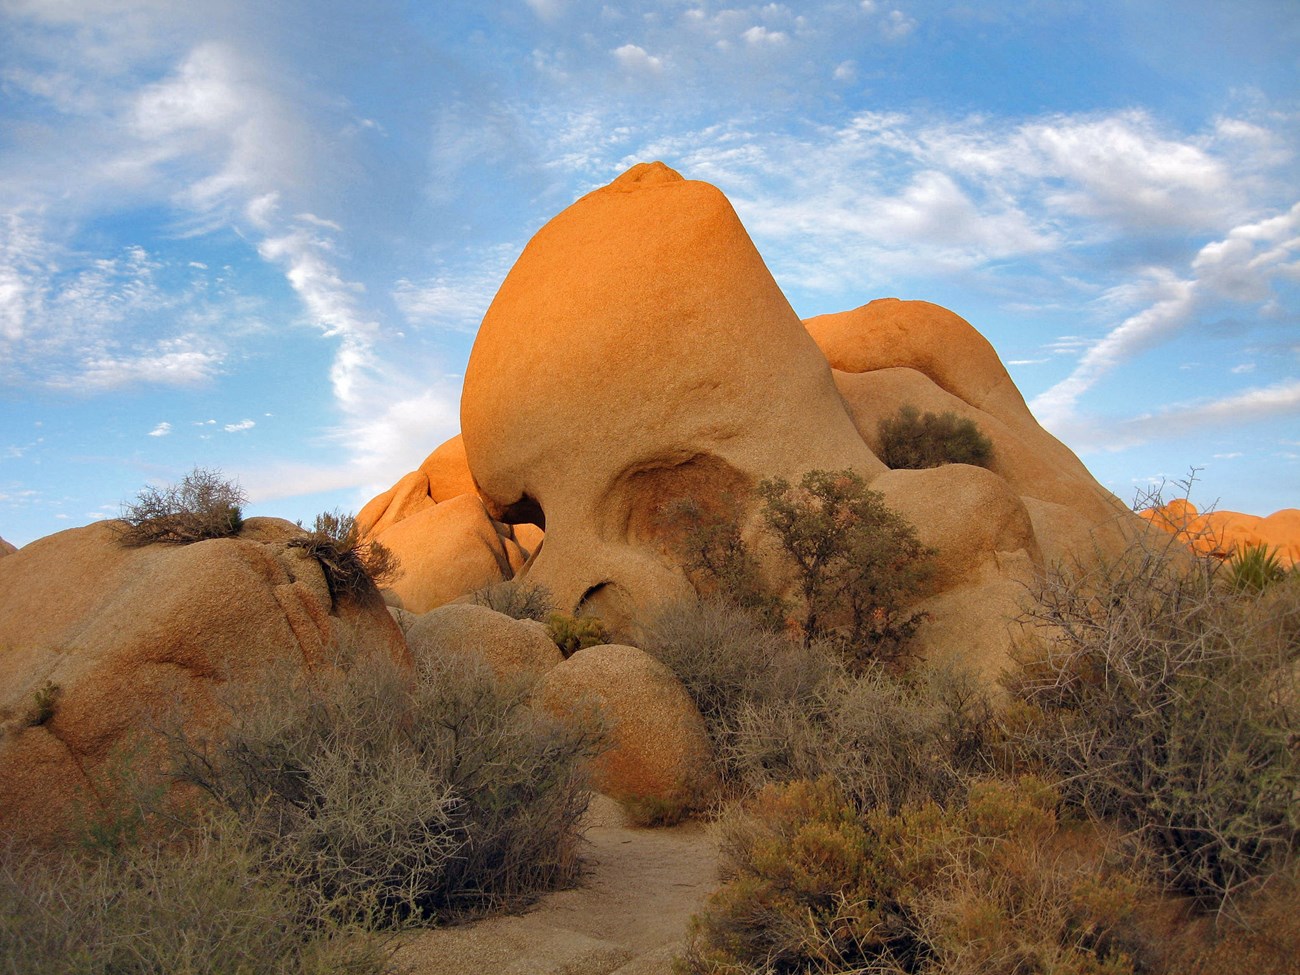 Skull-shaped rock formation surrounded by small brush, with a blue sky in the background. Photo: NPS / Robb Hannawacker